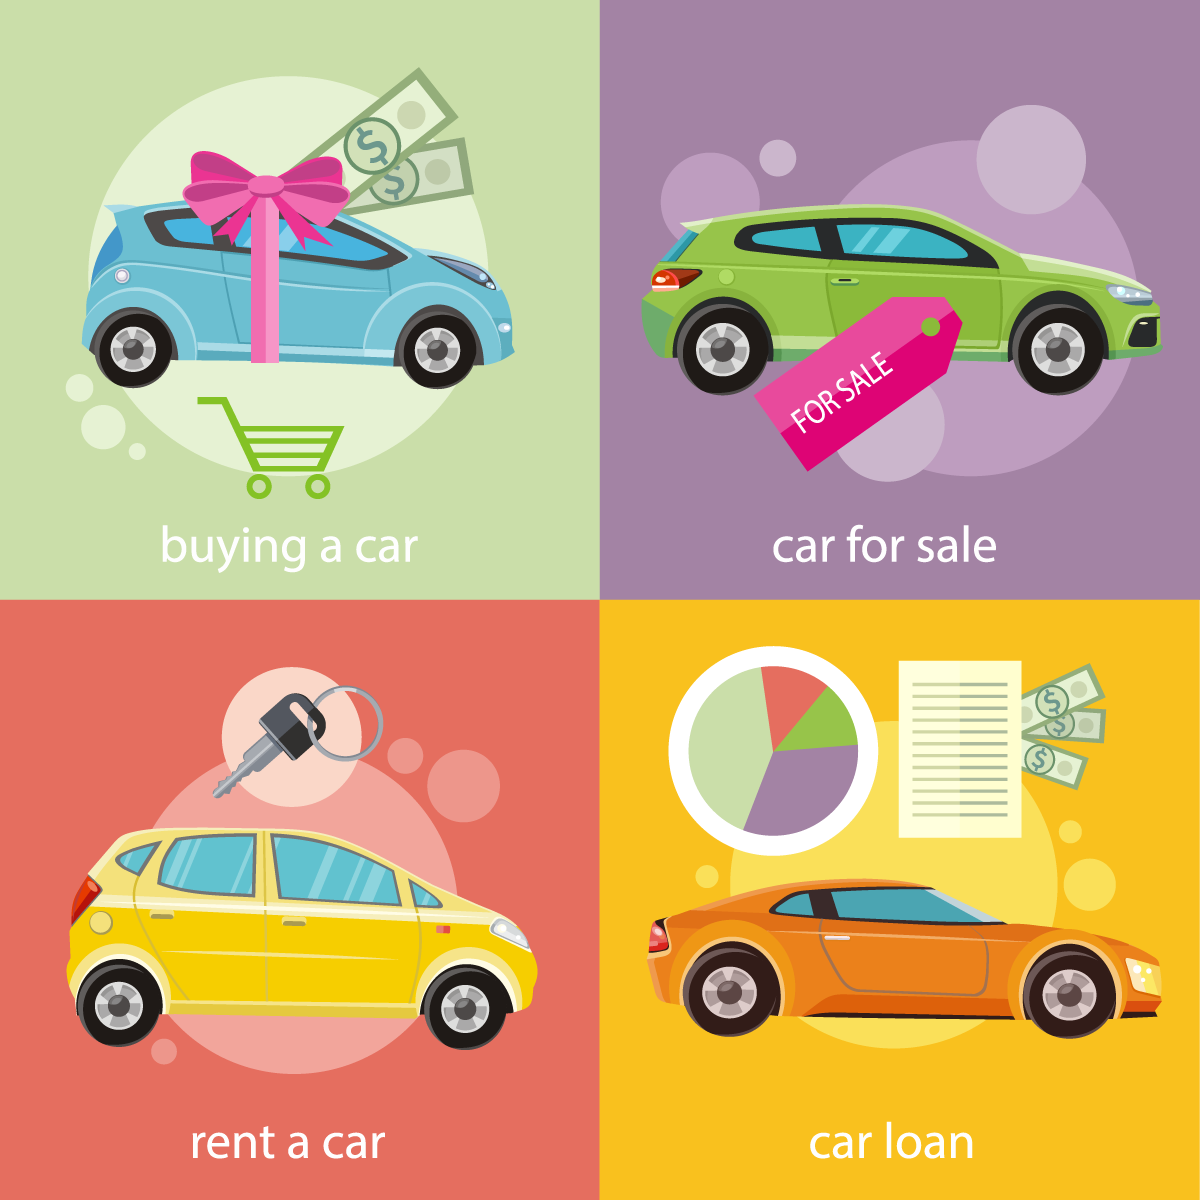 Leasing or Buying a Vehicle.